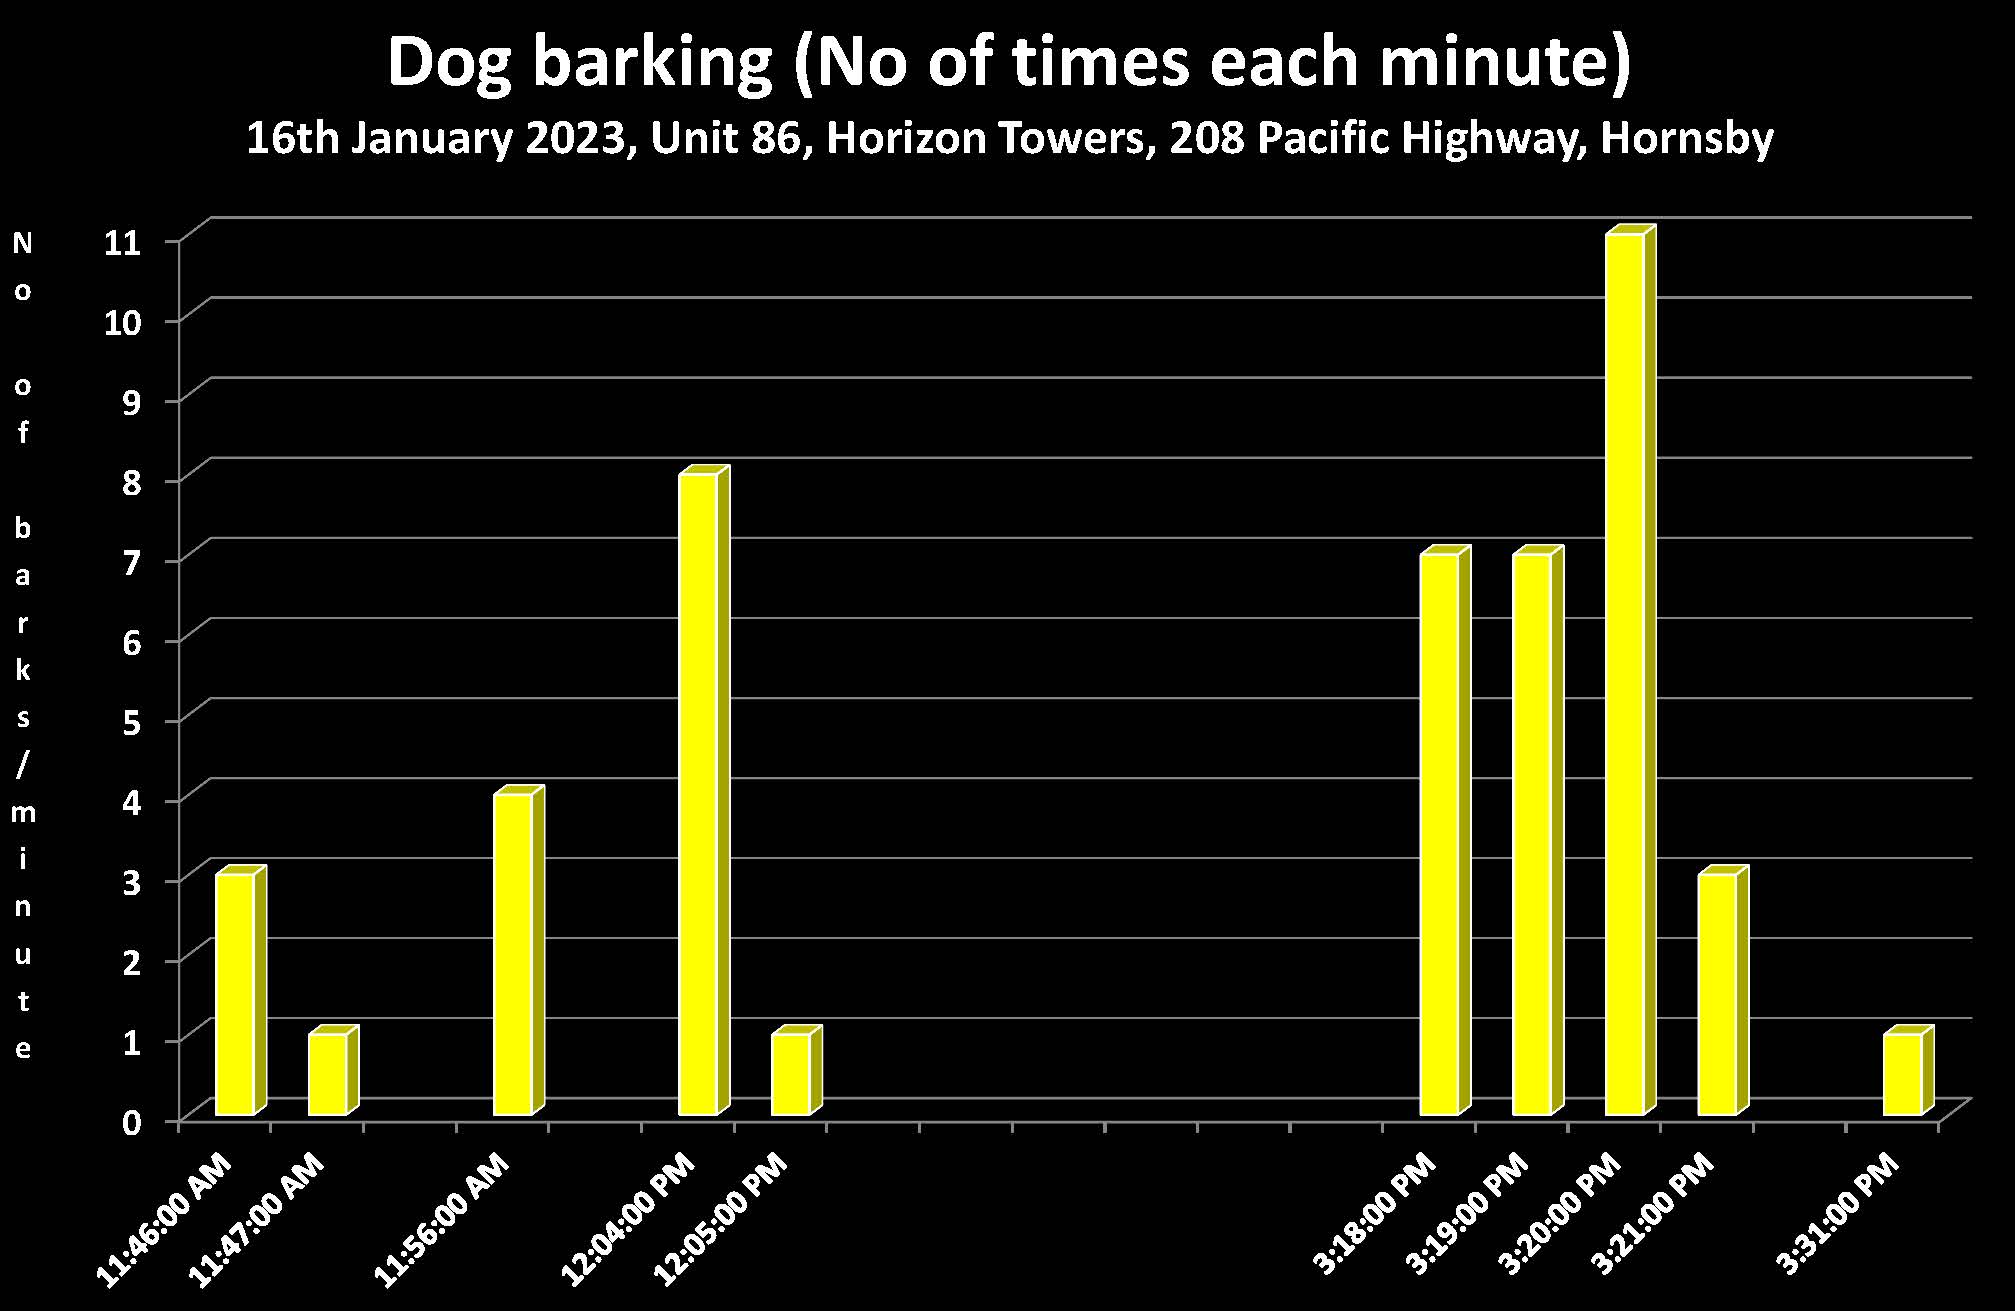 Chart of beagle bark counts on 16 January 2023 at 86 Horizon Towers Hornsby